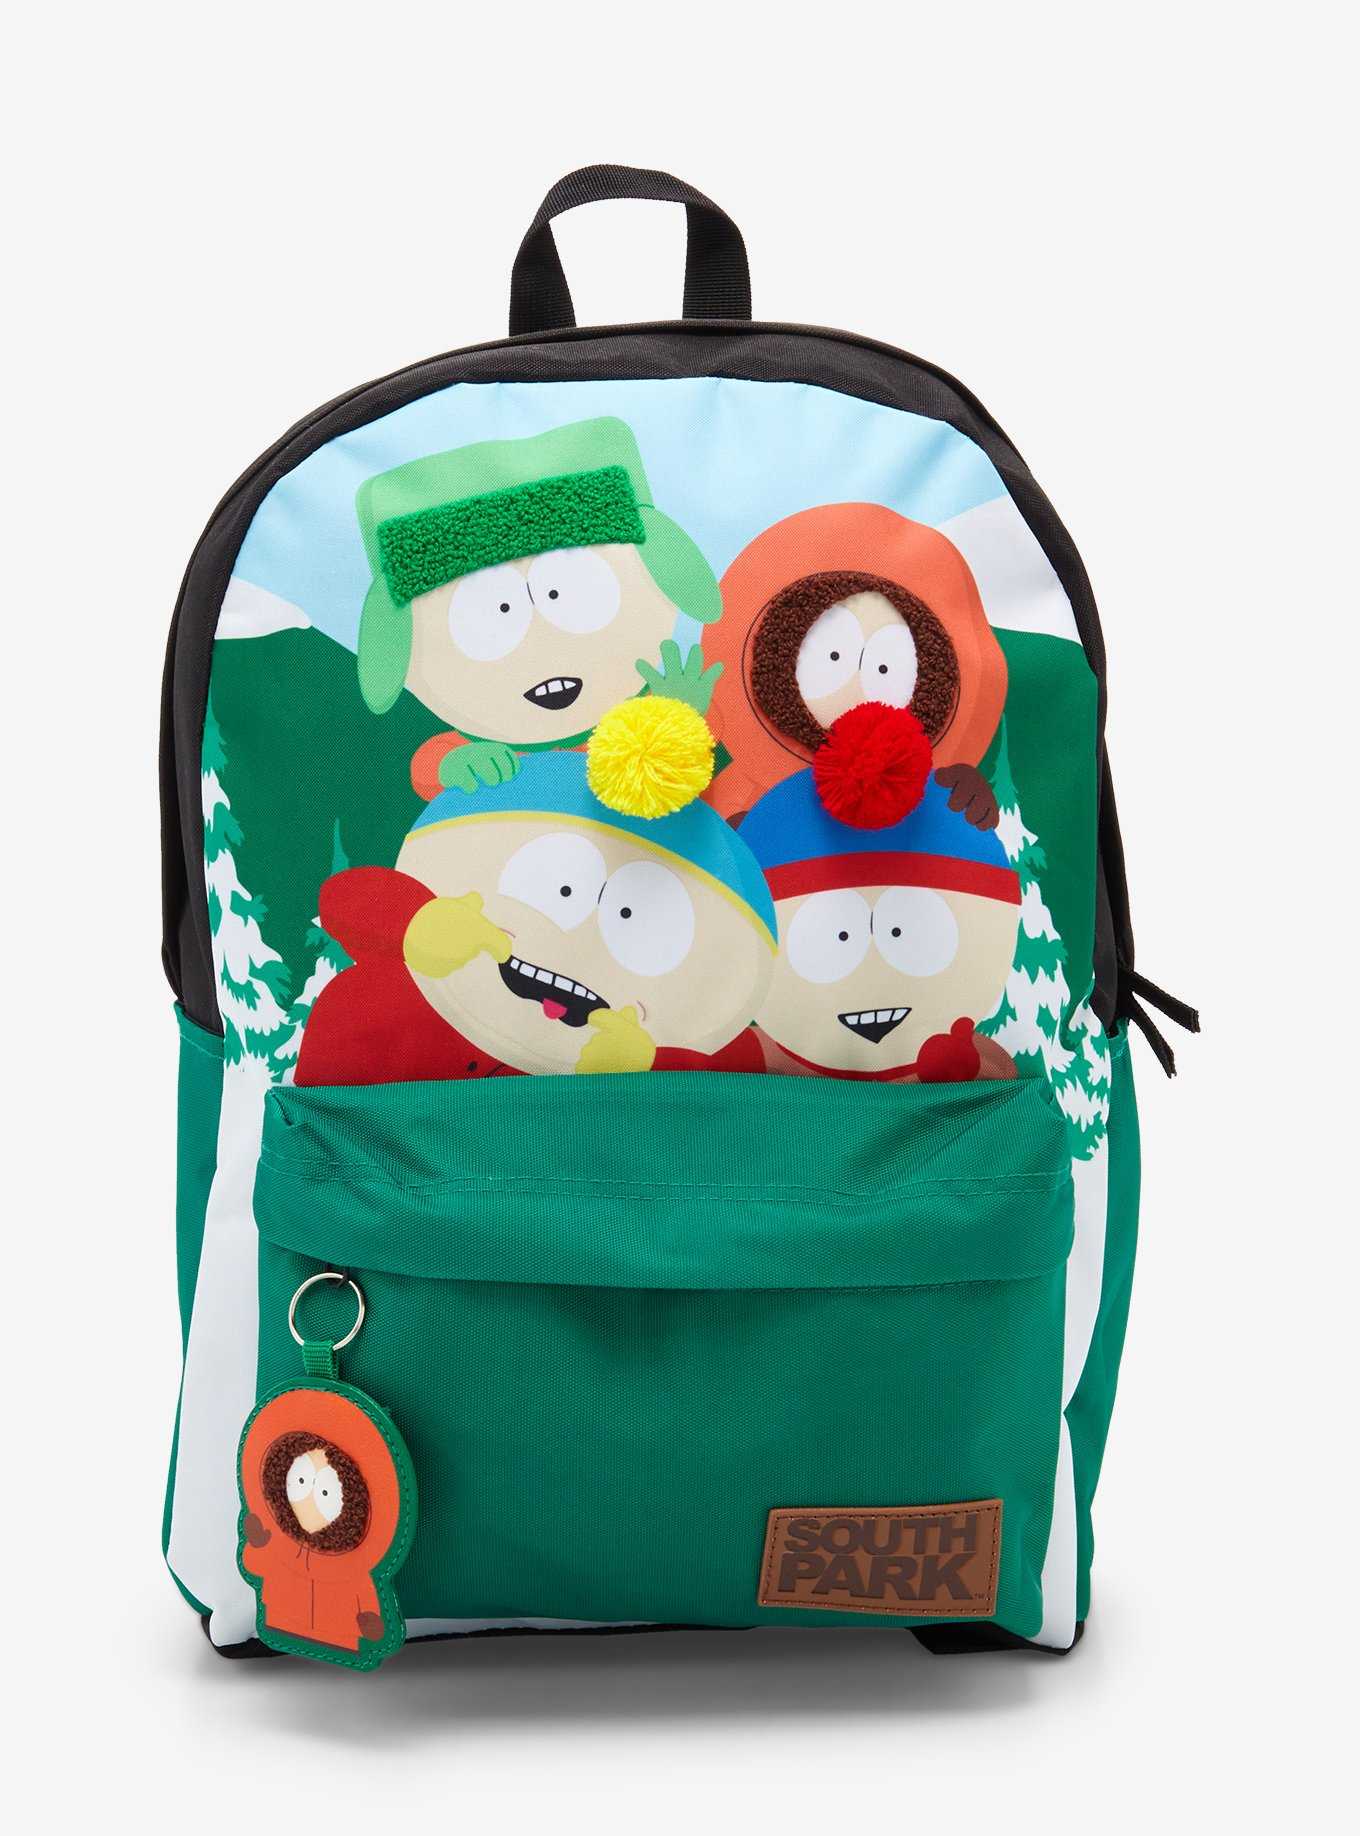 South Park Fuzzy Detail Backpack, , hi-res